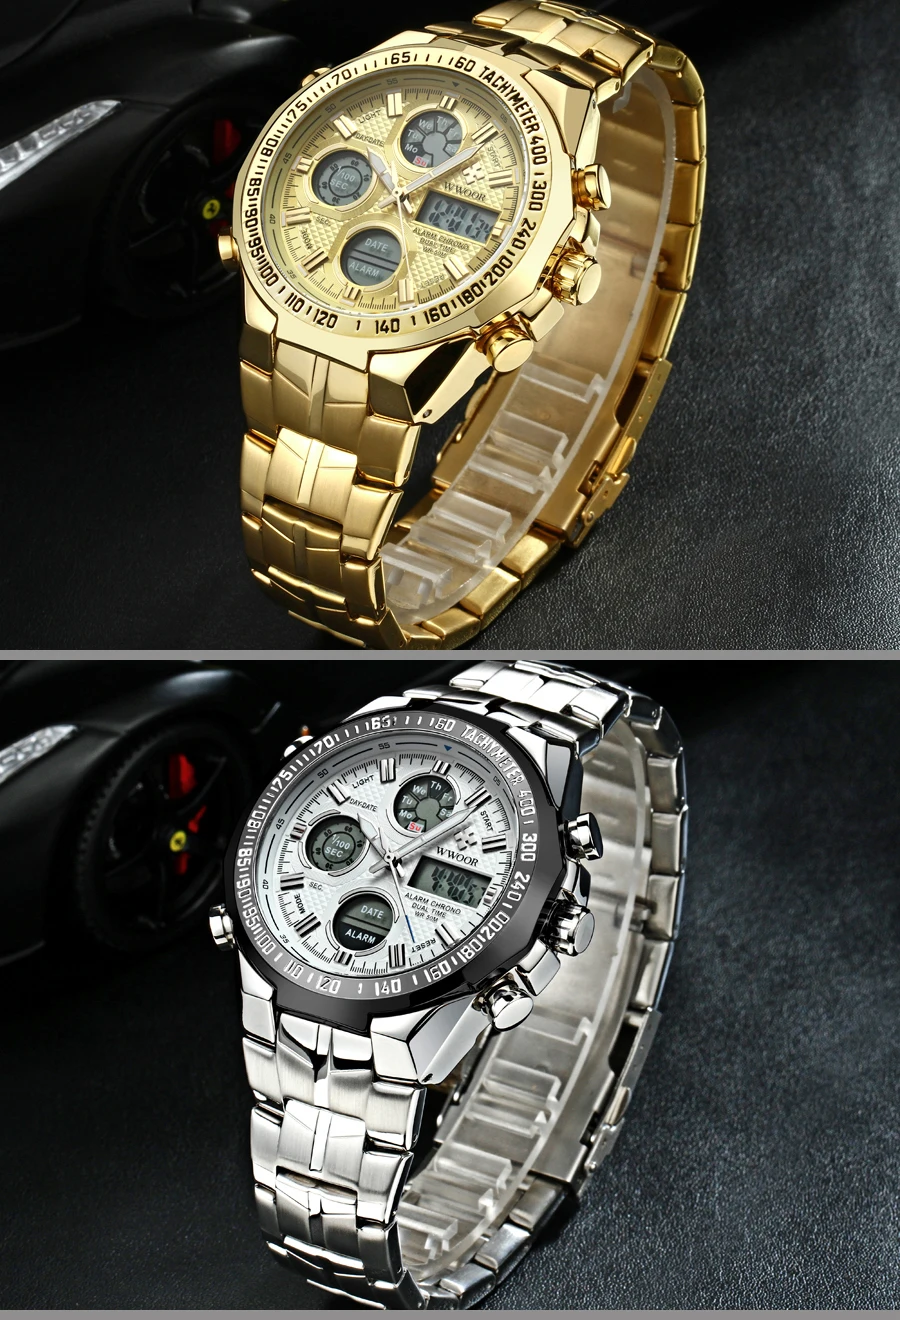  New Relogio masculino Top Luxury Gold Watch Men Big Watches Golden Stainless Steel Military Wristwatch Big Dial Clock Male (8)